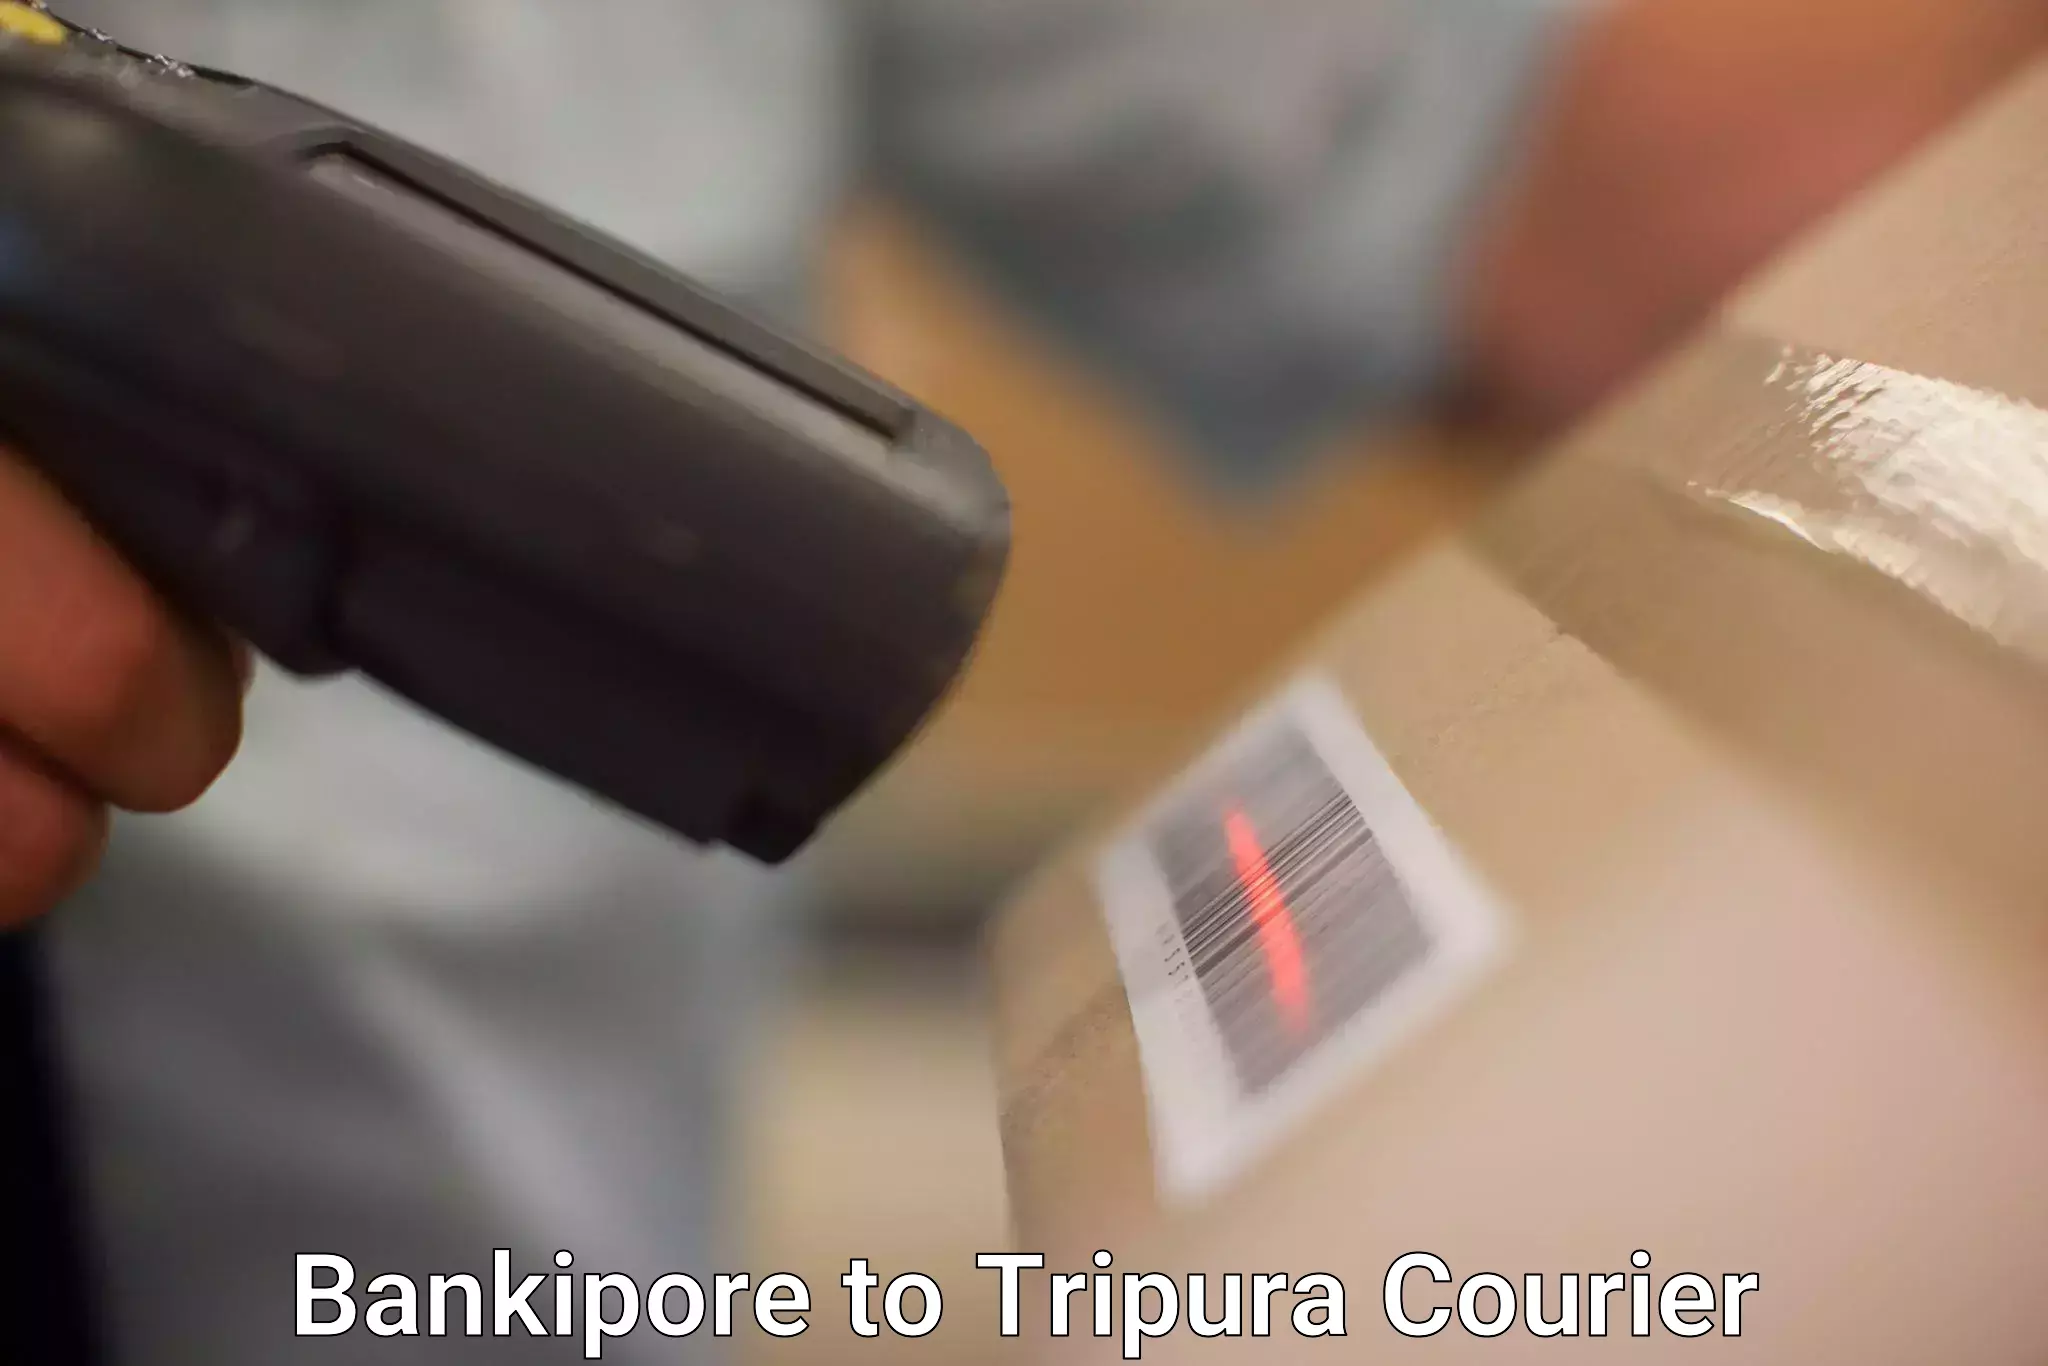 Affordable parcel service in Bankipore to Udaipur Tripura